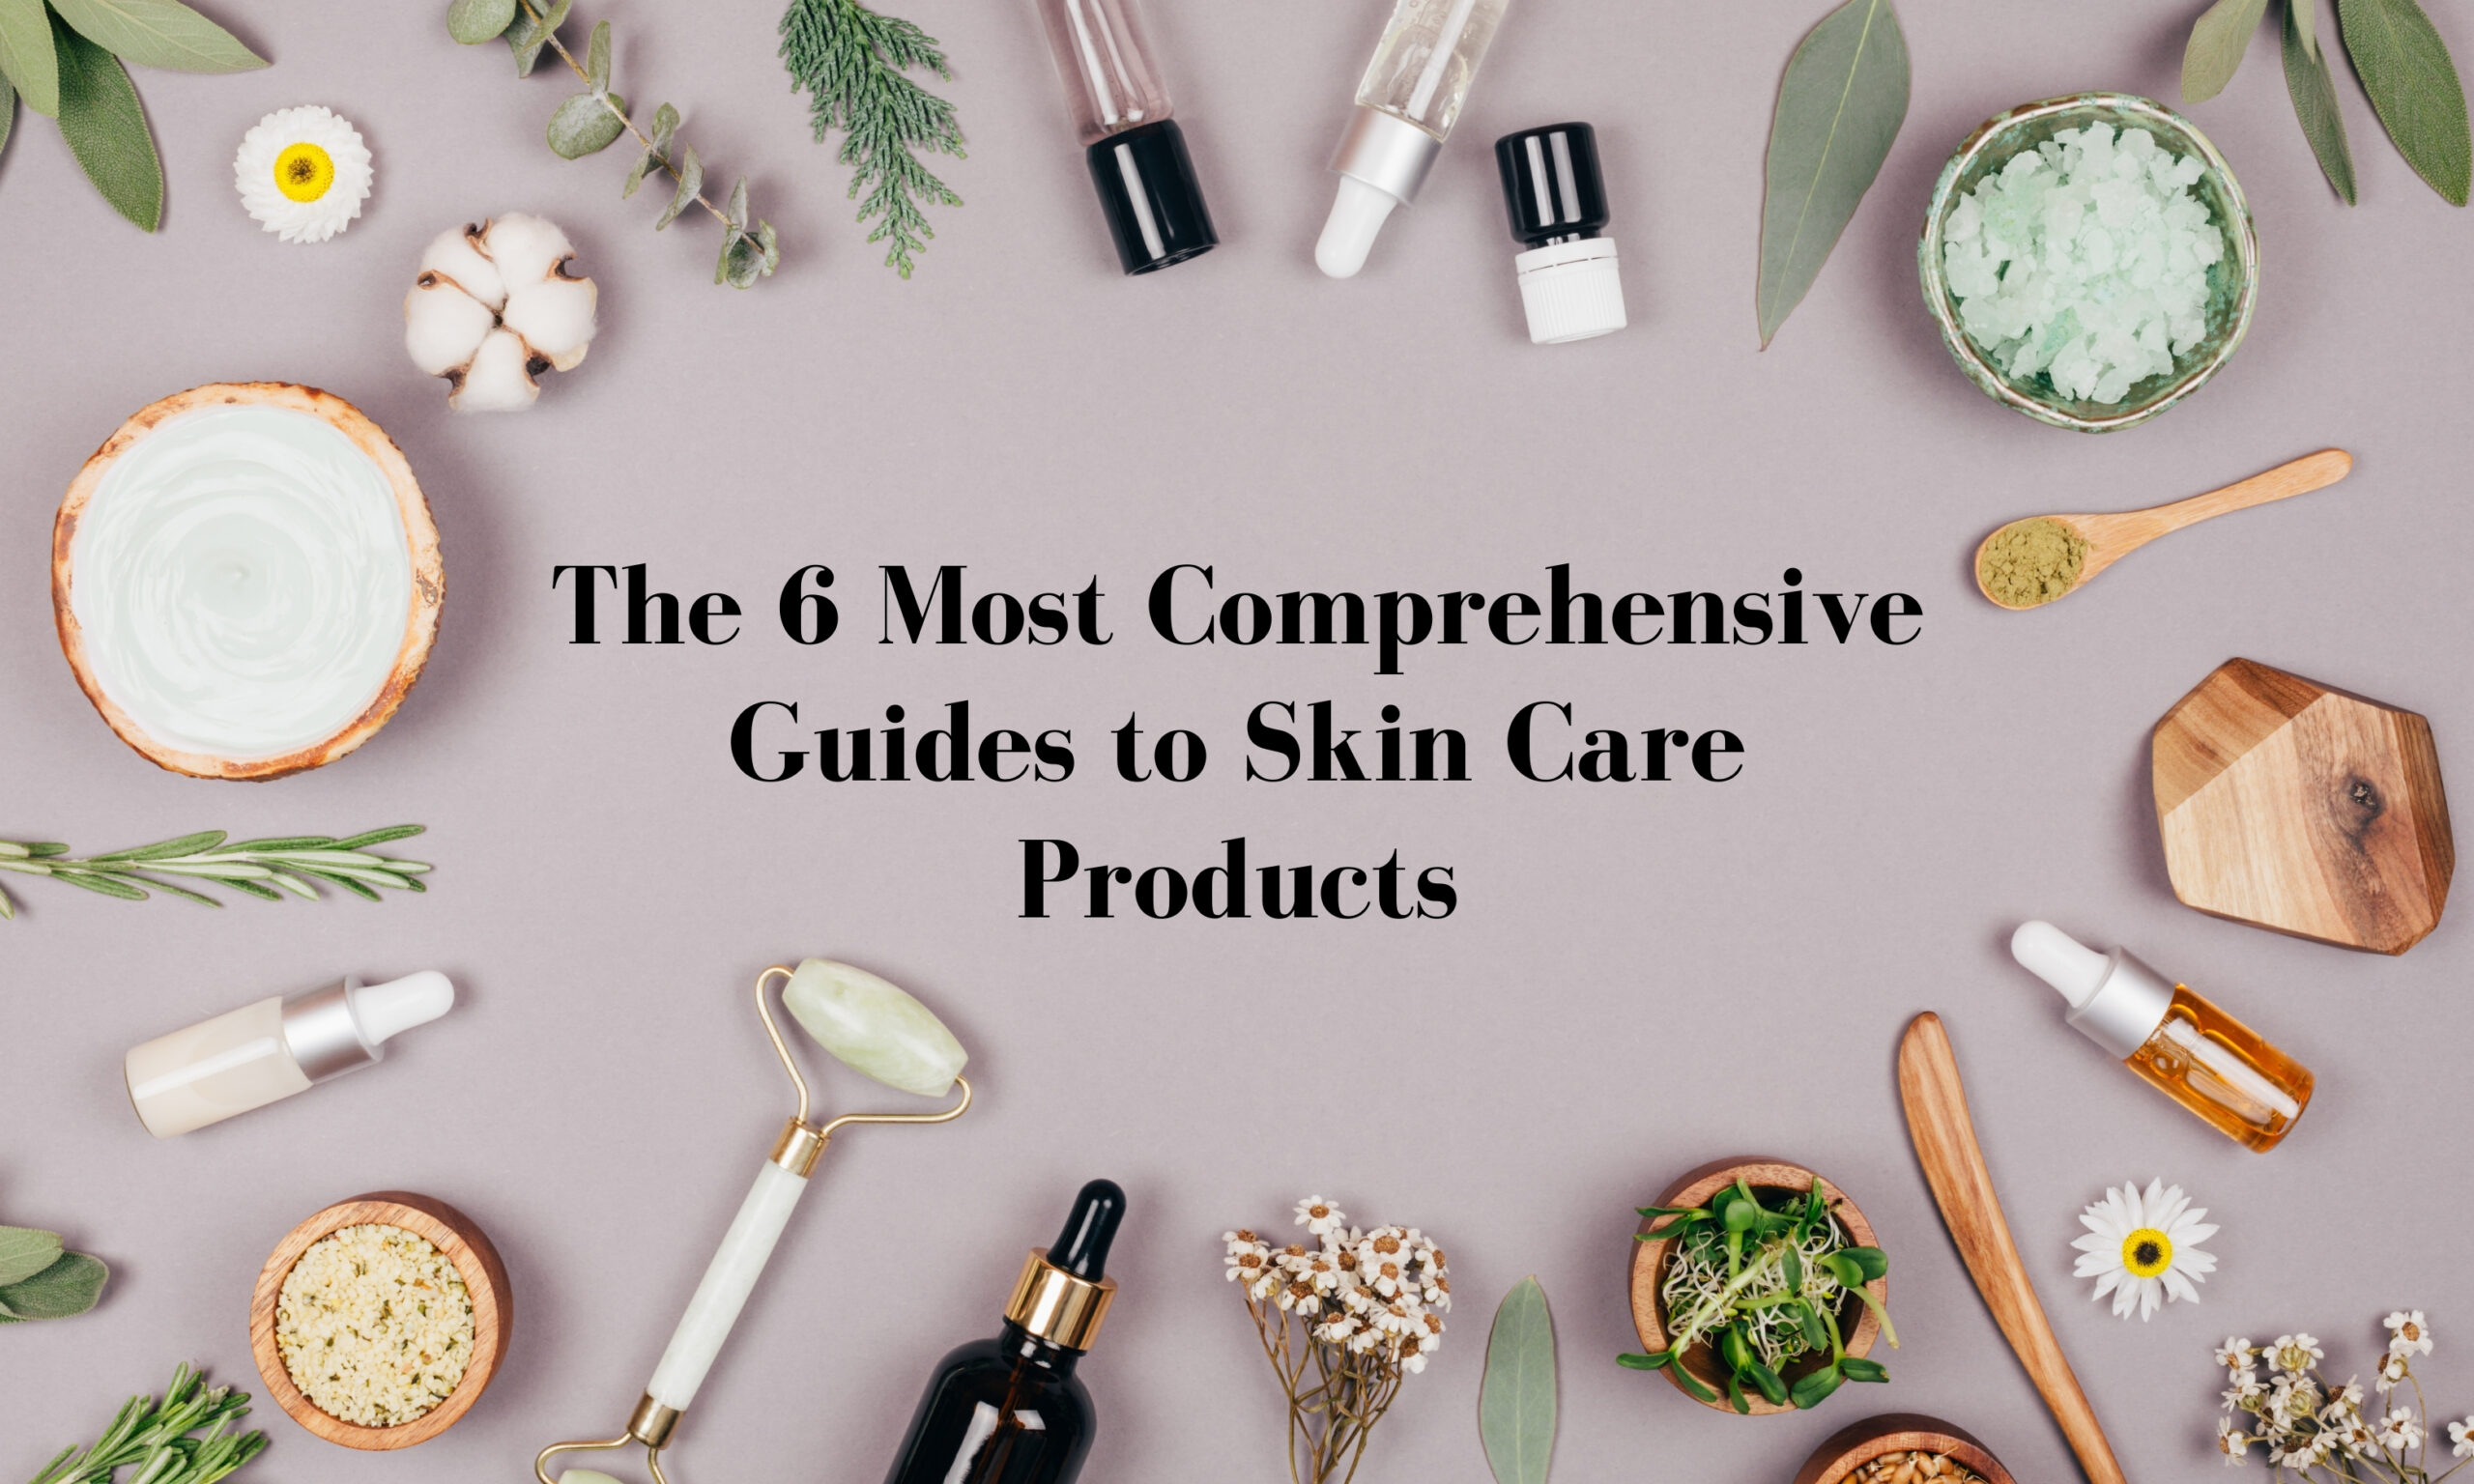 The 6 Most Comprehensive Guides to Skin Care Products